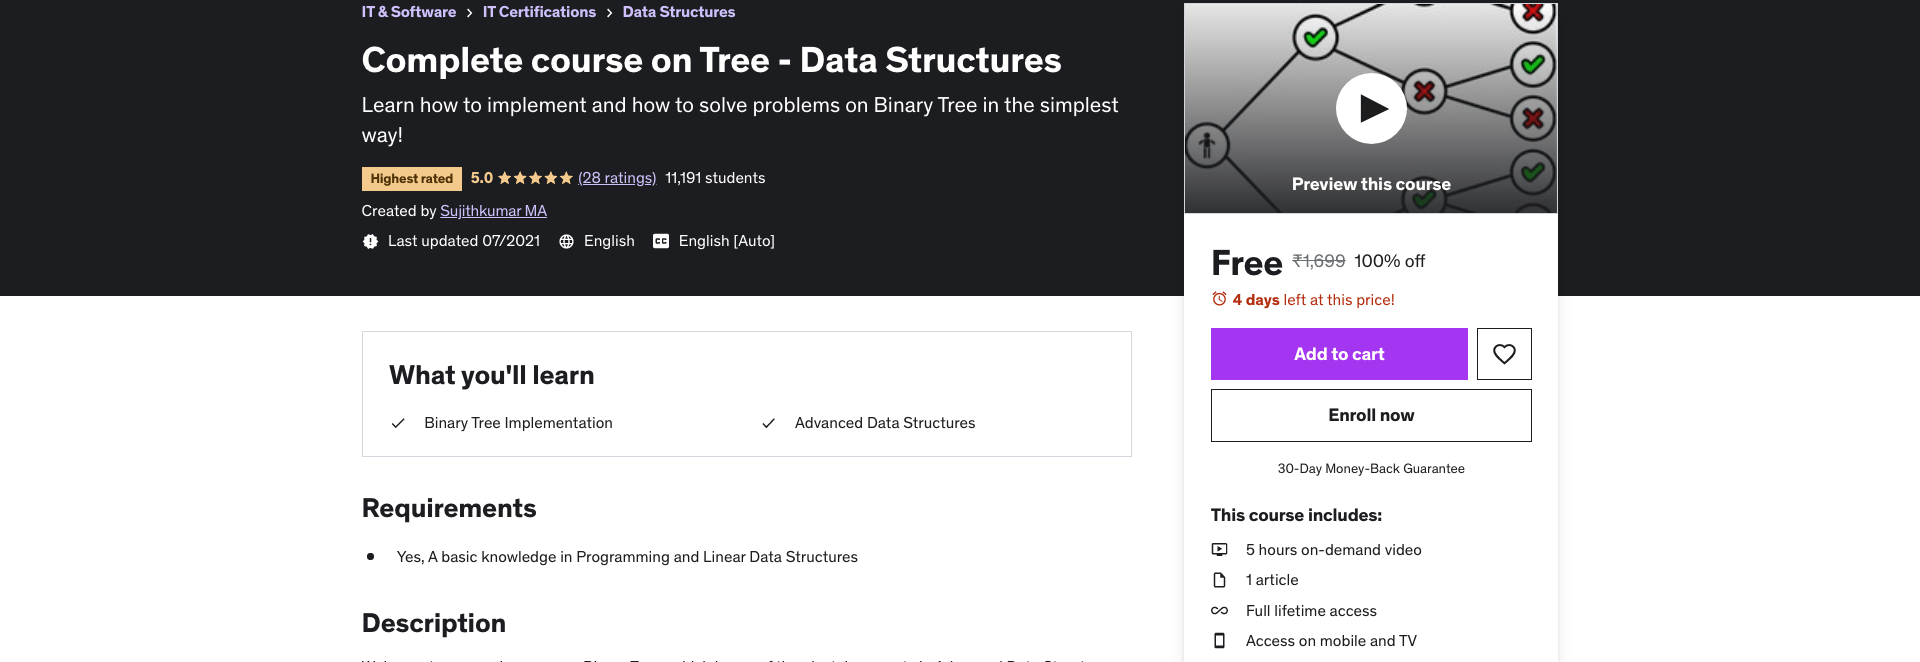 Complete course on Tree - Data Structures